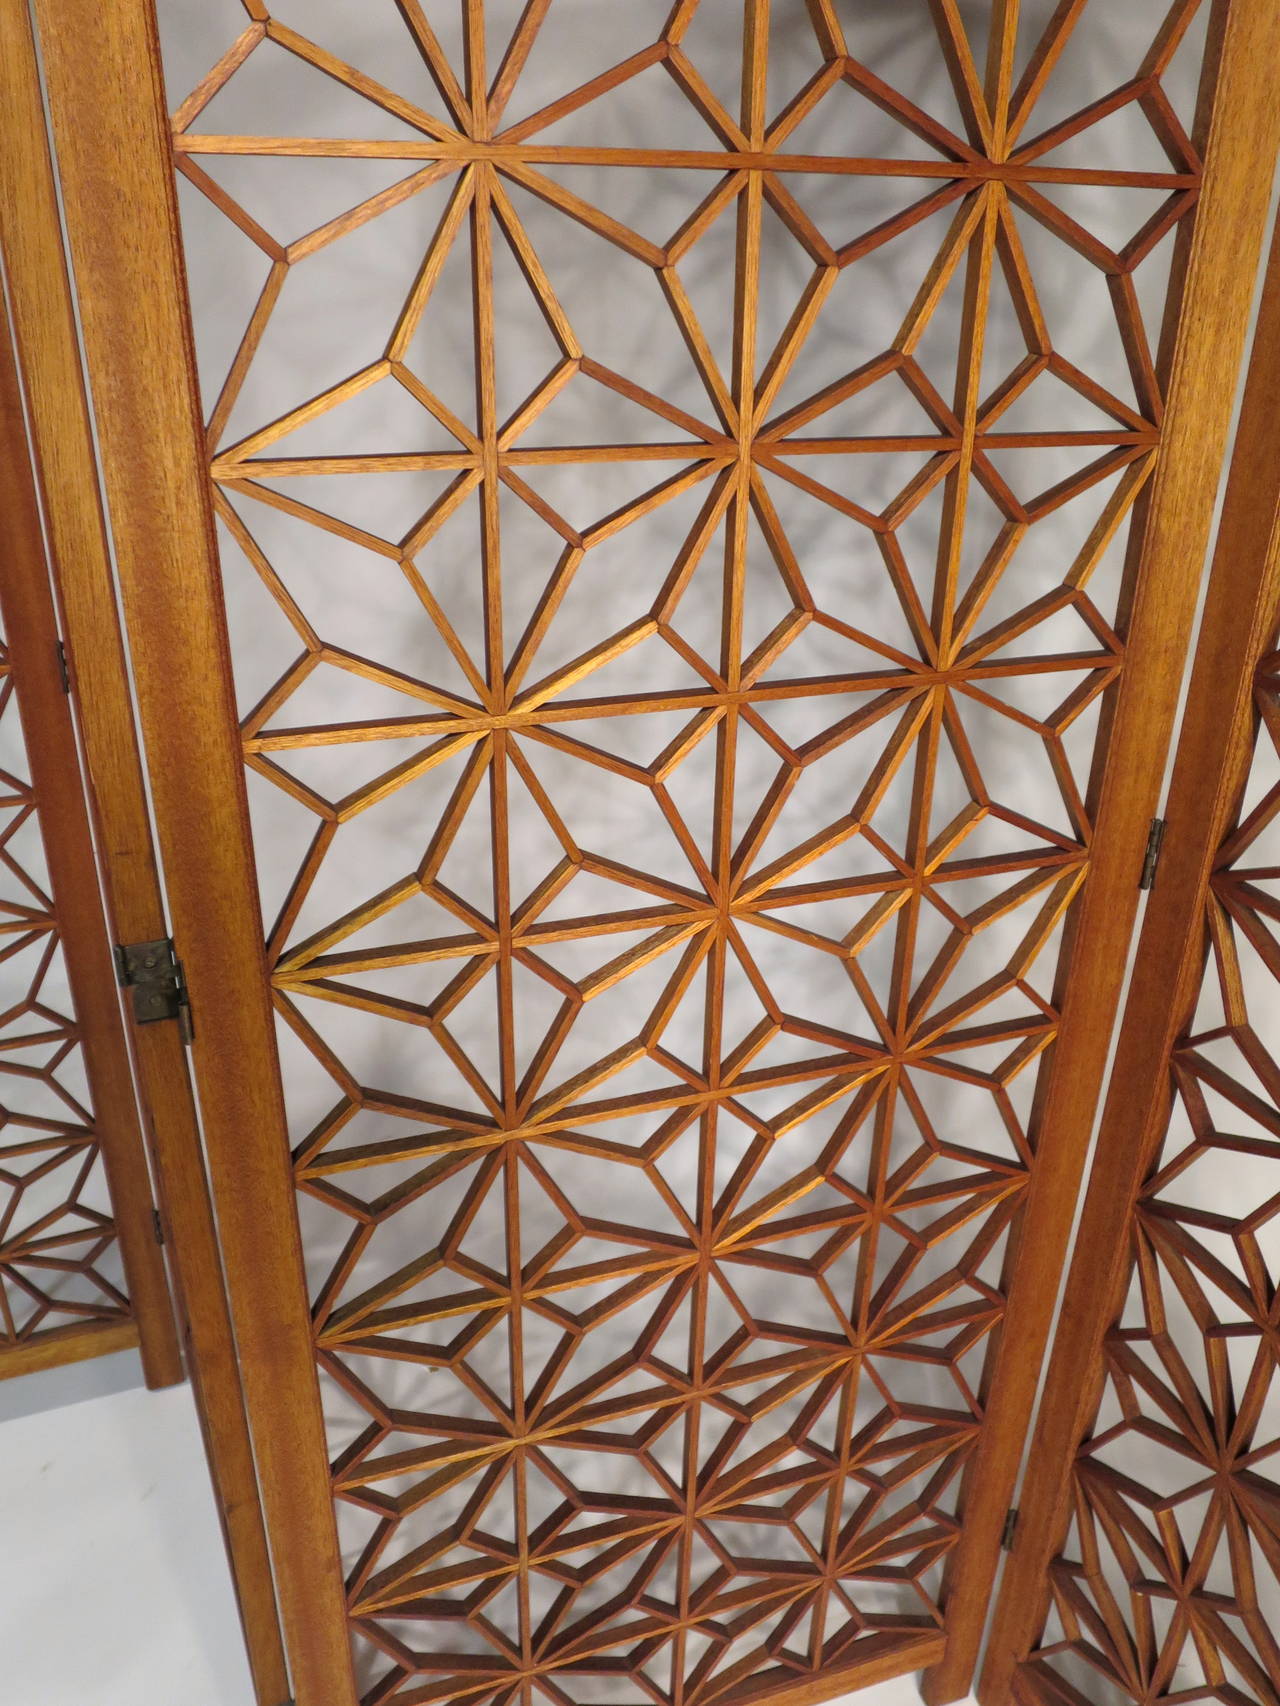 Mid-20th Century Mid-Century Modern Geometric Screen or Divider For Sale